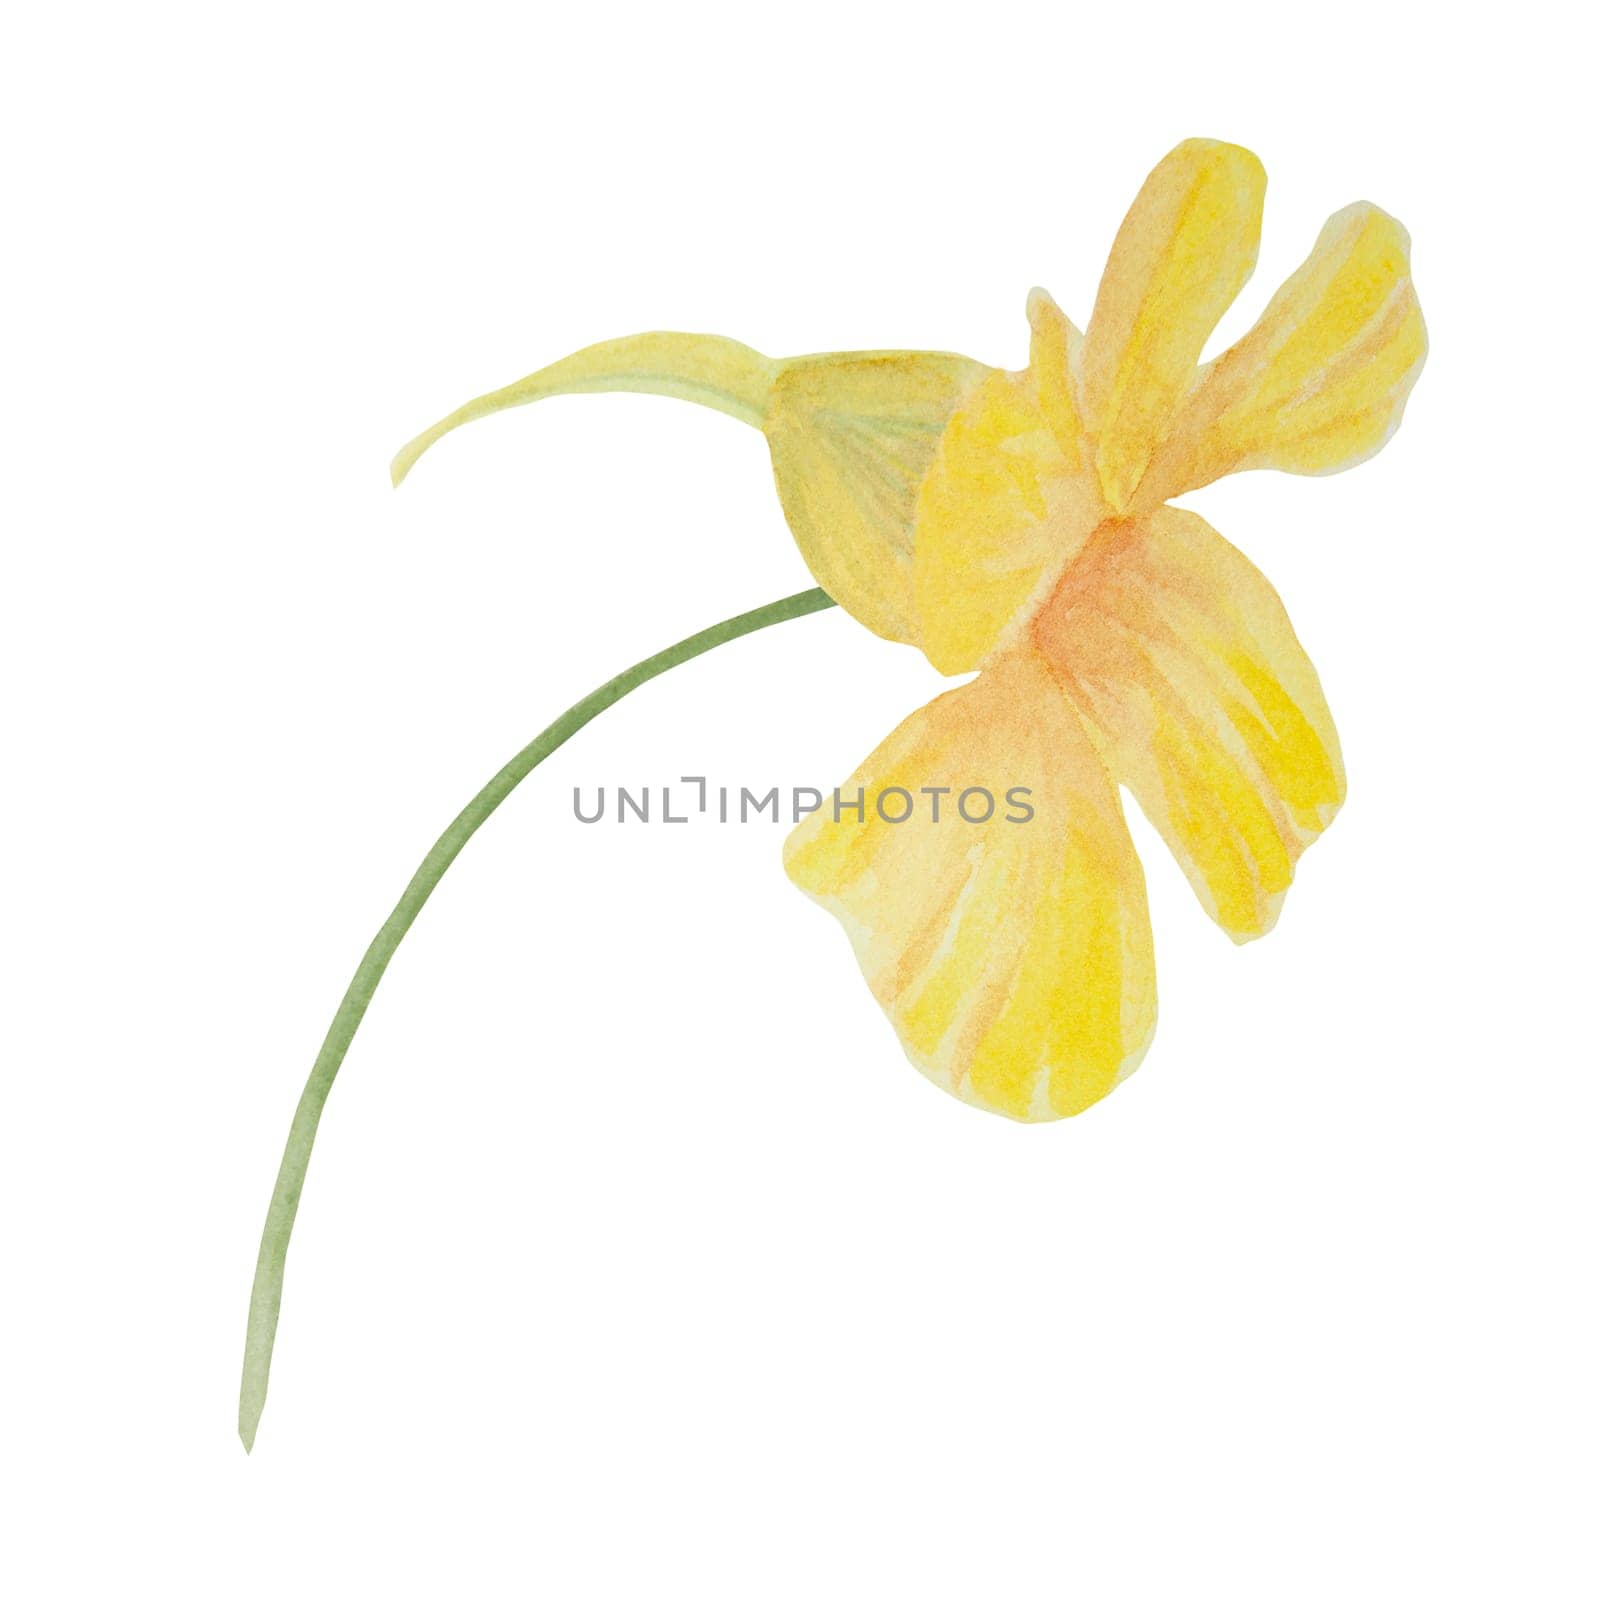 Garden orange, yellow Nasturtium watercolor illustration. Hand drawn botanical painting, floral sketch. Colorful flower clipart for summer or autumn design of wedding invitation, prints, greetings, sublimation, textile